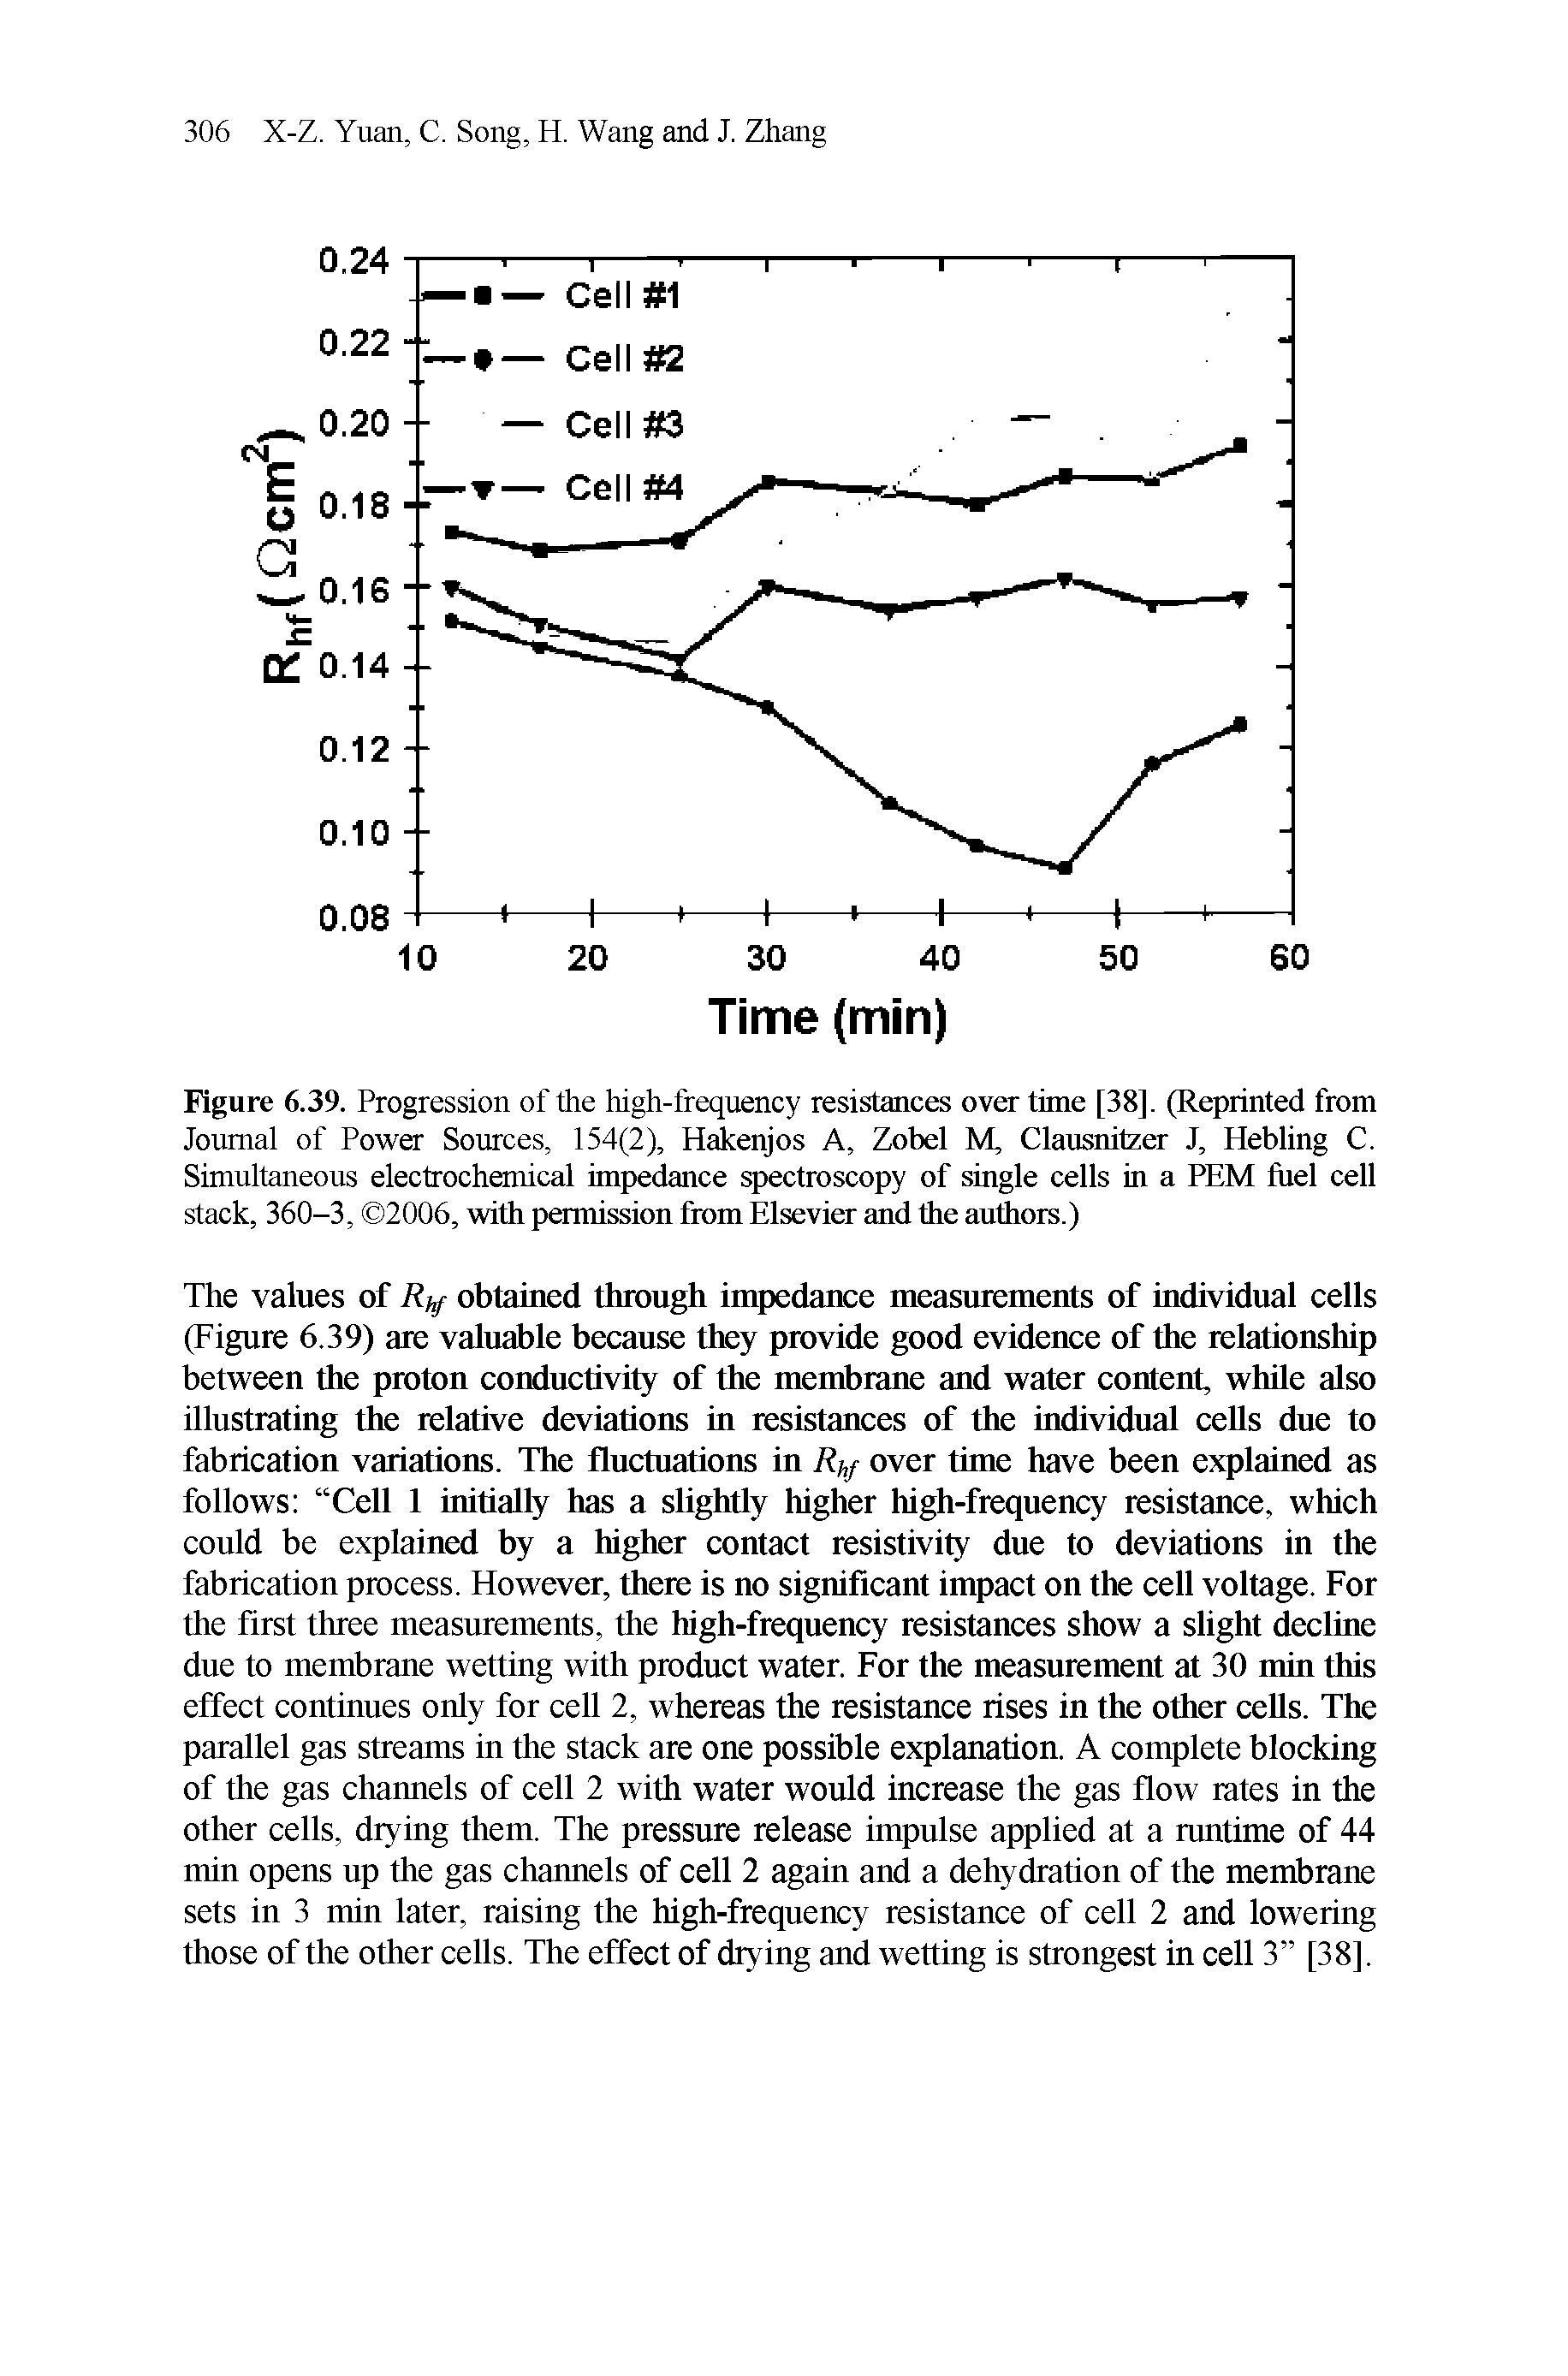 Figure 6.39. Progression of the high-frequency resistances over time [38], (Reprinted from Journal of Power Sources, 154(2), Hakenjos A, Zobel M, Clausnitzer J, Hebling C. Simultaneous electrochemical impedance spectroscopy of single cells in a PEM fuel cell stack, 360-3, 2006, with permission from Elsevier and the authors.)...